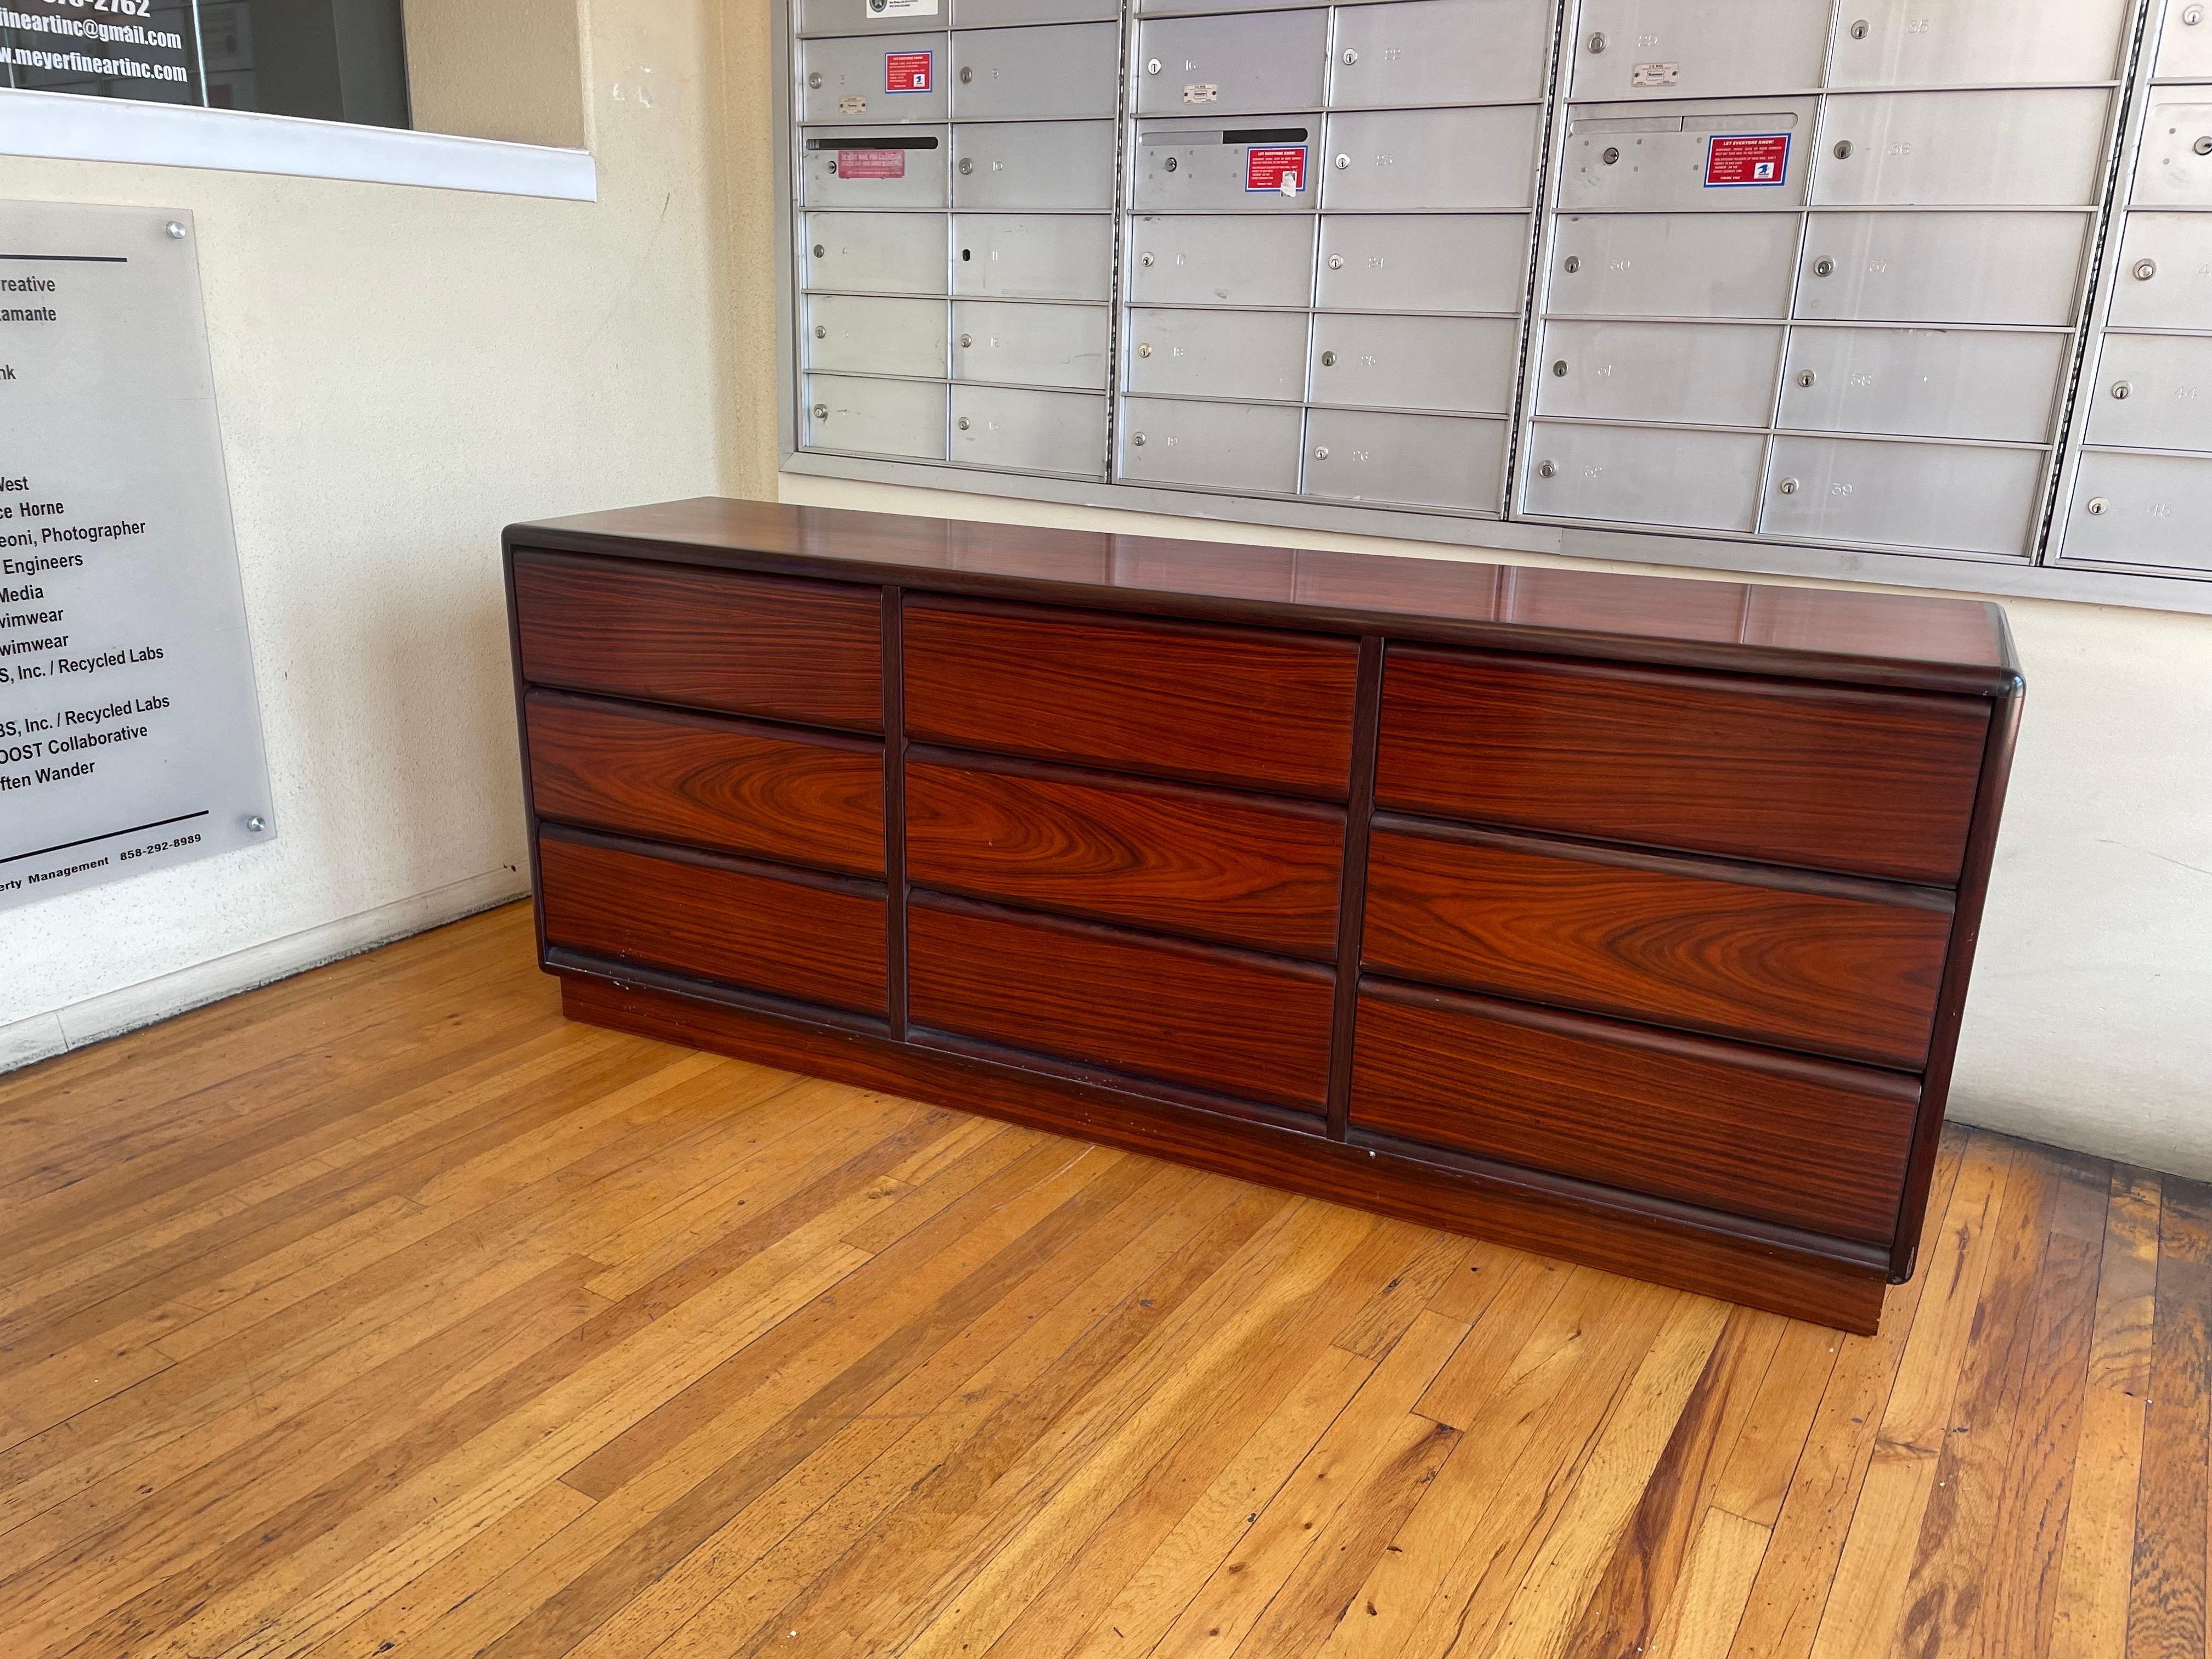 Beautiful 1980's striking 9 drawer dresser by Brouer made in Denmark circa 1980s, very nice and clean condition circa 1980's we have oiled and cleaned the piece light marks on the piece due to age but overall very nice clean original finish and